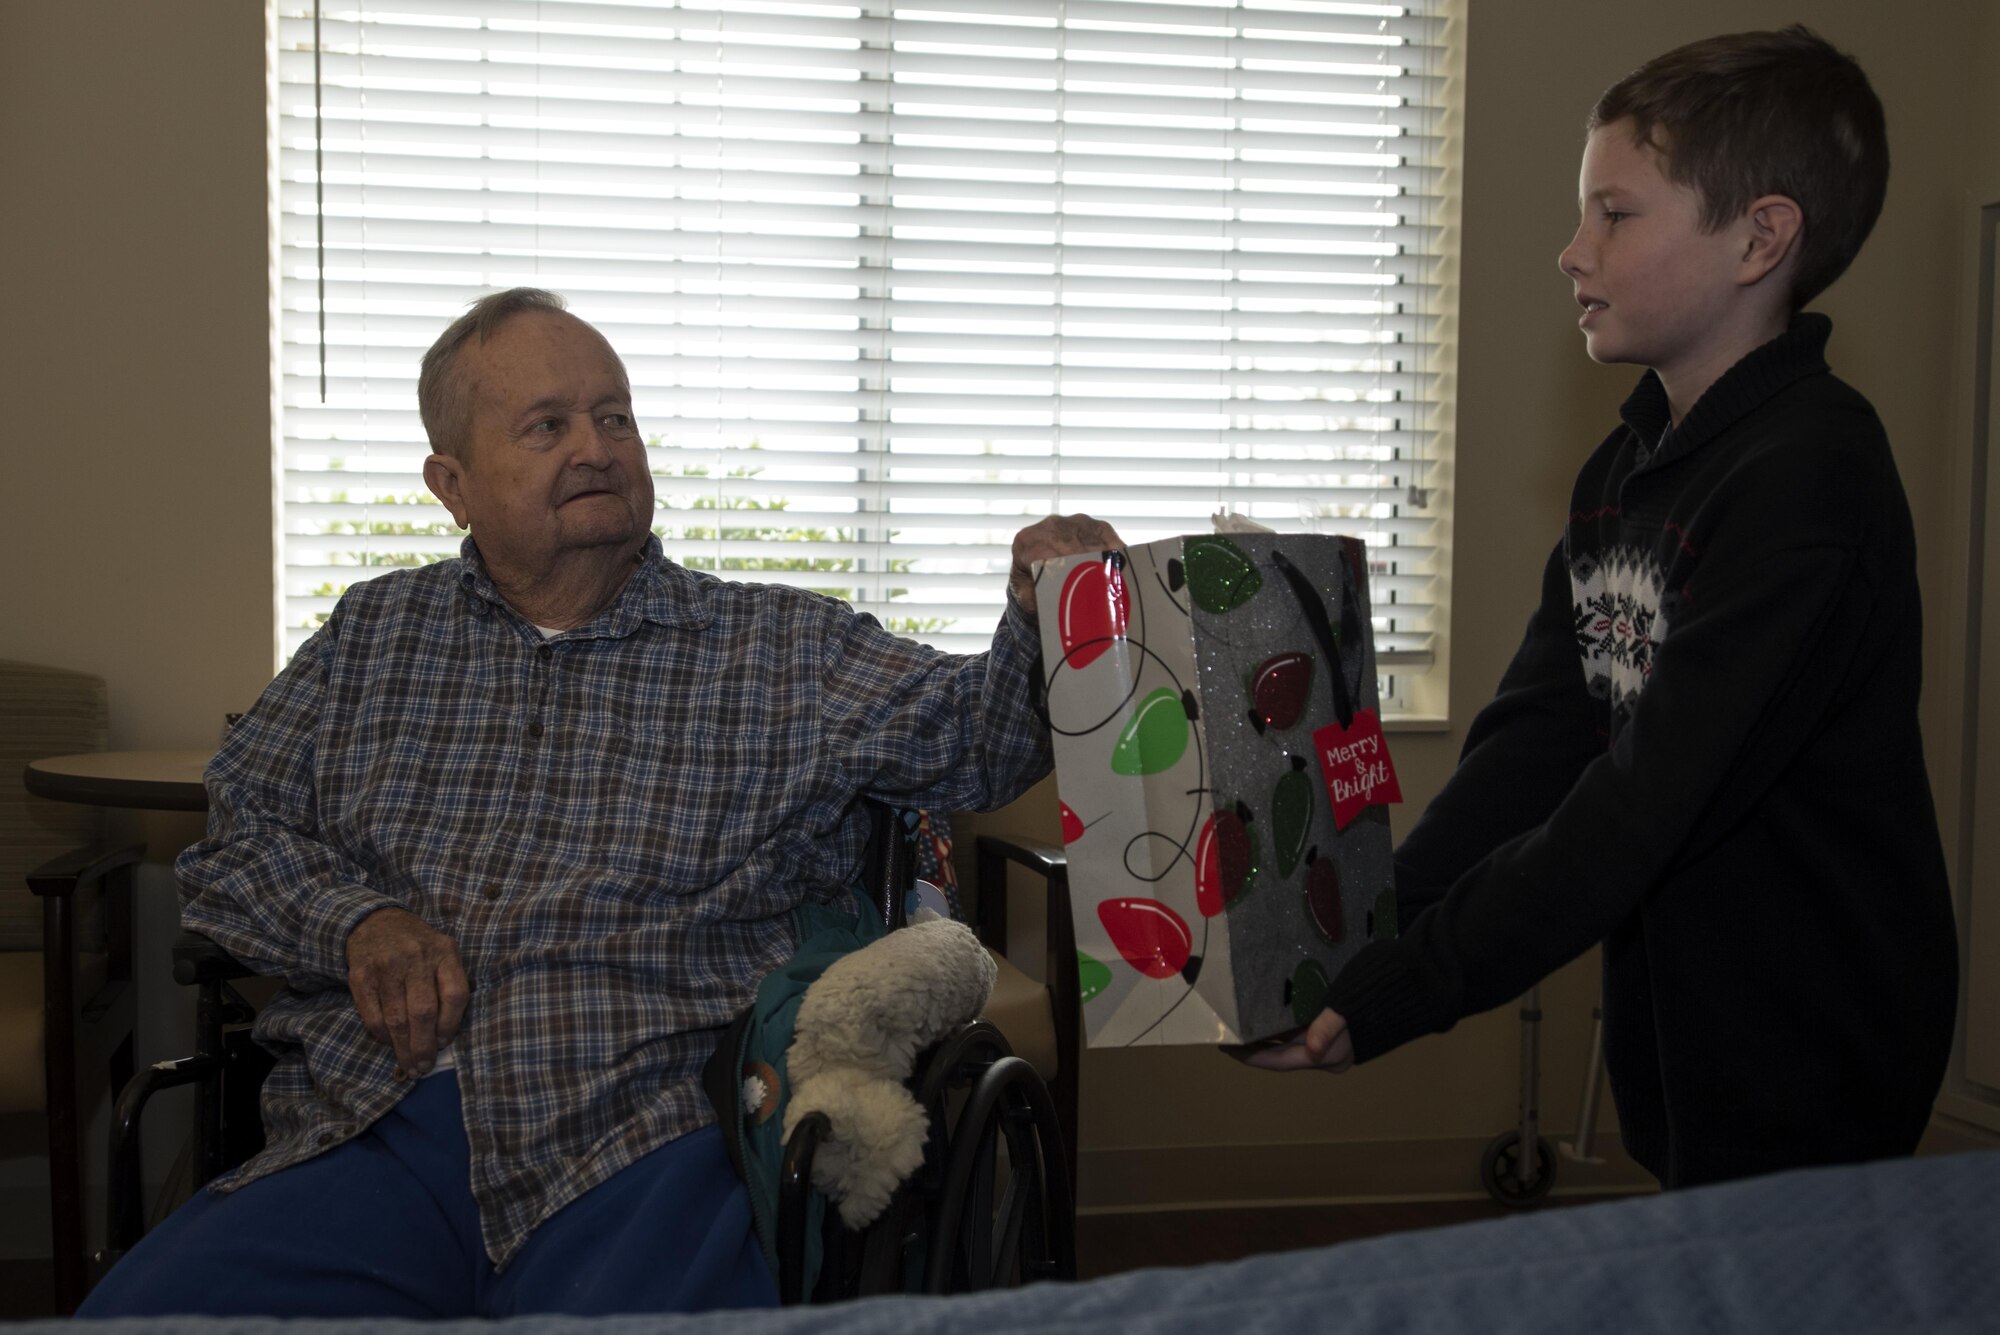 Lyman Sauls (left), U.S. Army veteran and resident of North Carolina State Veterans Home, receives a gift bag from the son of Col. Christopher Sage, 4th Fighter Wing commander, Dec. 24, 2016, in Kinston, North Carolina. More than 90 residents were visited and received a goody bag and holiday card. (U.S. Air Force photo by Airman Shawna L. Keyes)